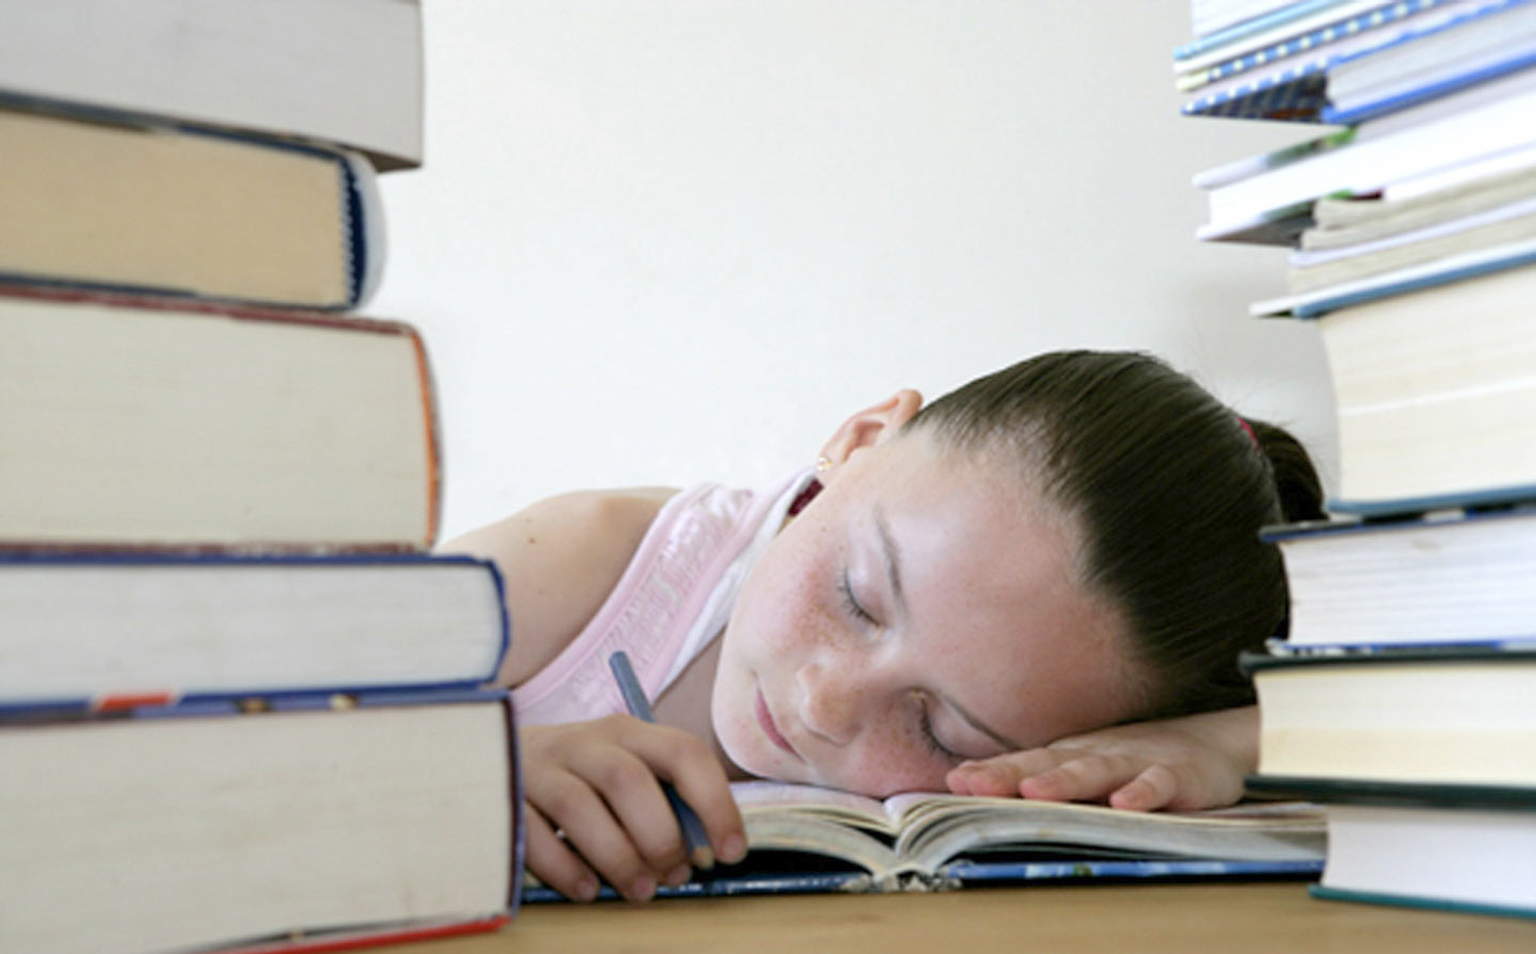 A child is sitting at a table, asleep with her head resting on a book. On the table, either side of her are two piles of books.